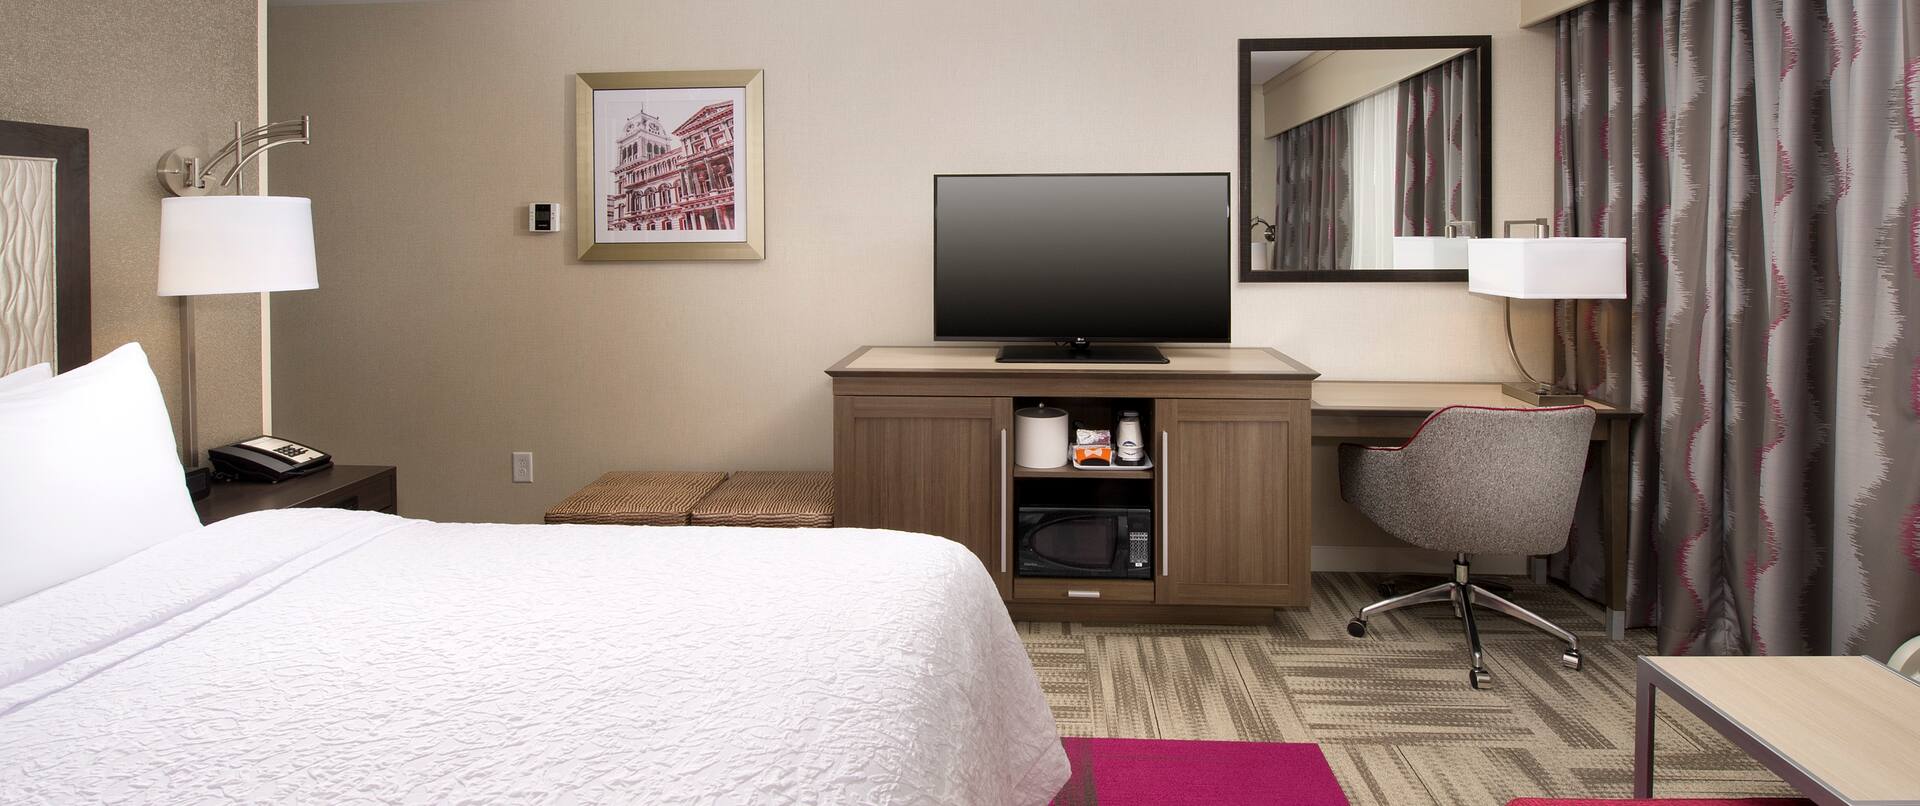 King Guest Room with TV and Desk